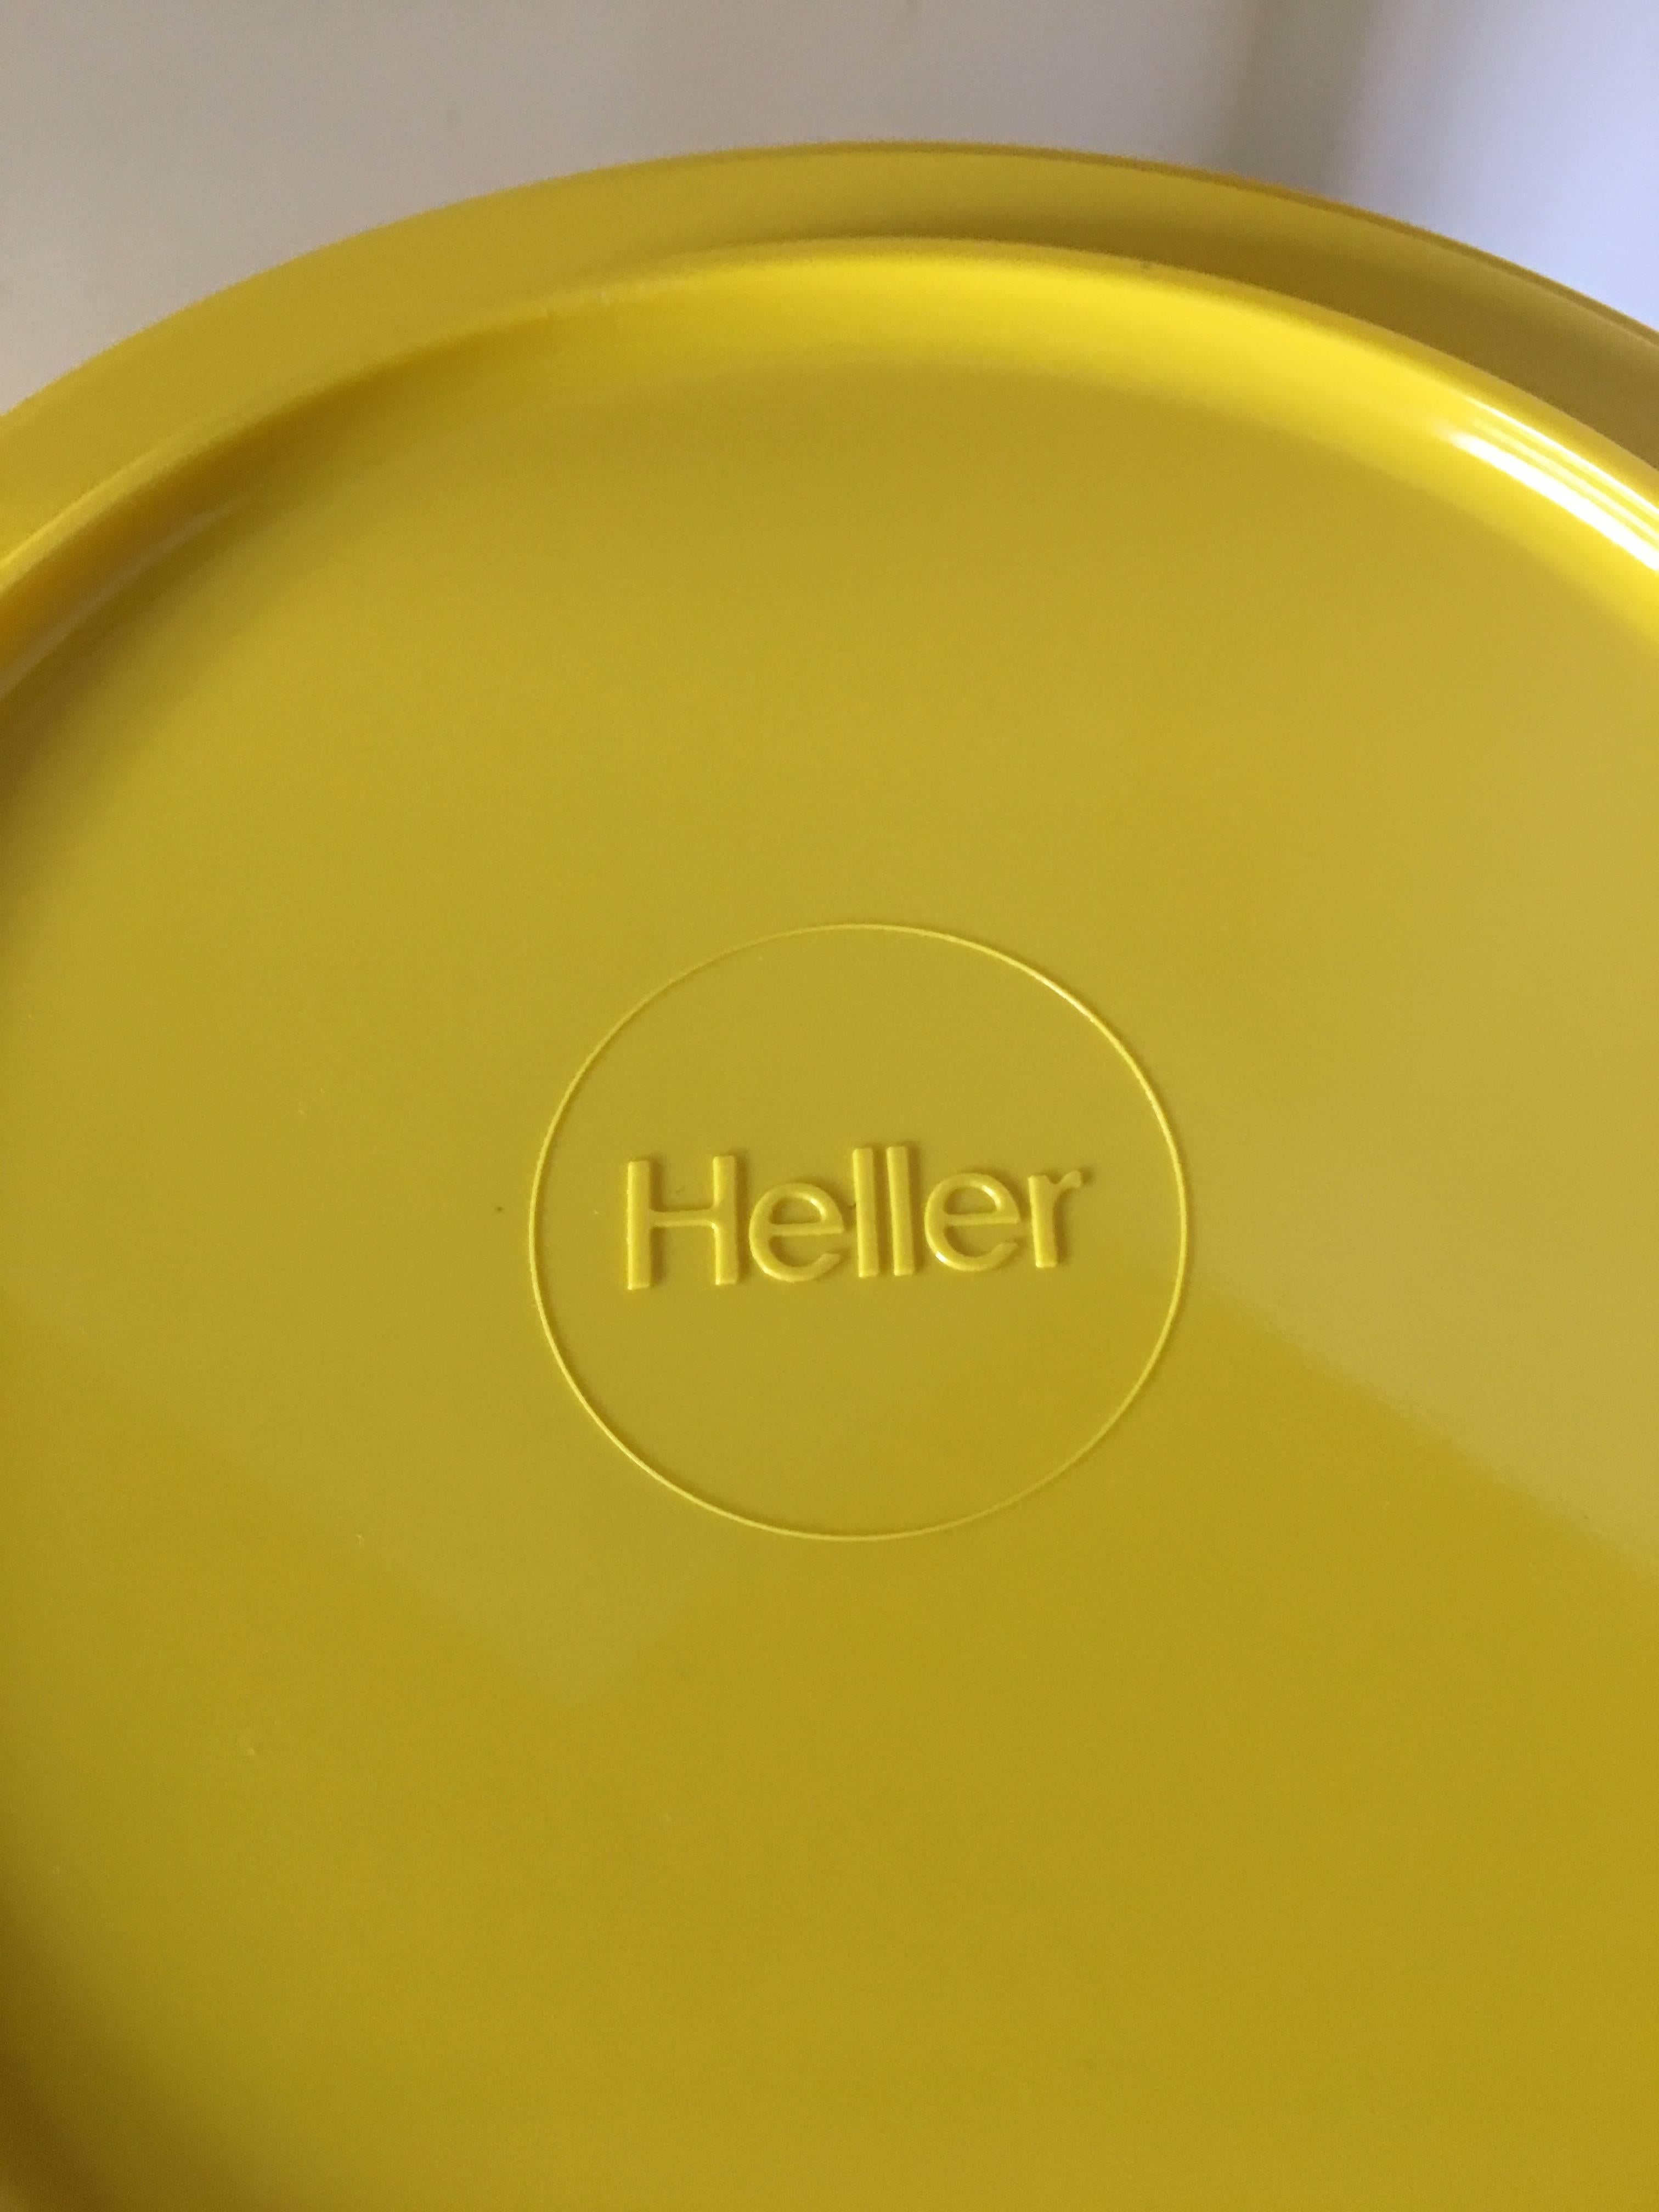 42-piece collection of vibrant yellow melamine dinnerware designed by Massimo Vignelli for Heller. This compact, stackable design is in the permanent collection at the Museum of Modern Art and the Metropolitan Museum. Some pieces not marked or